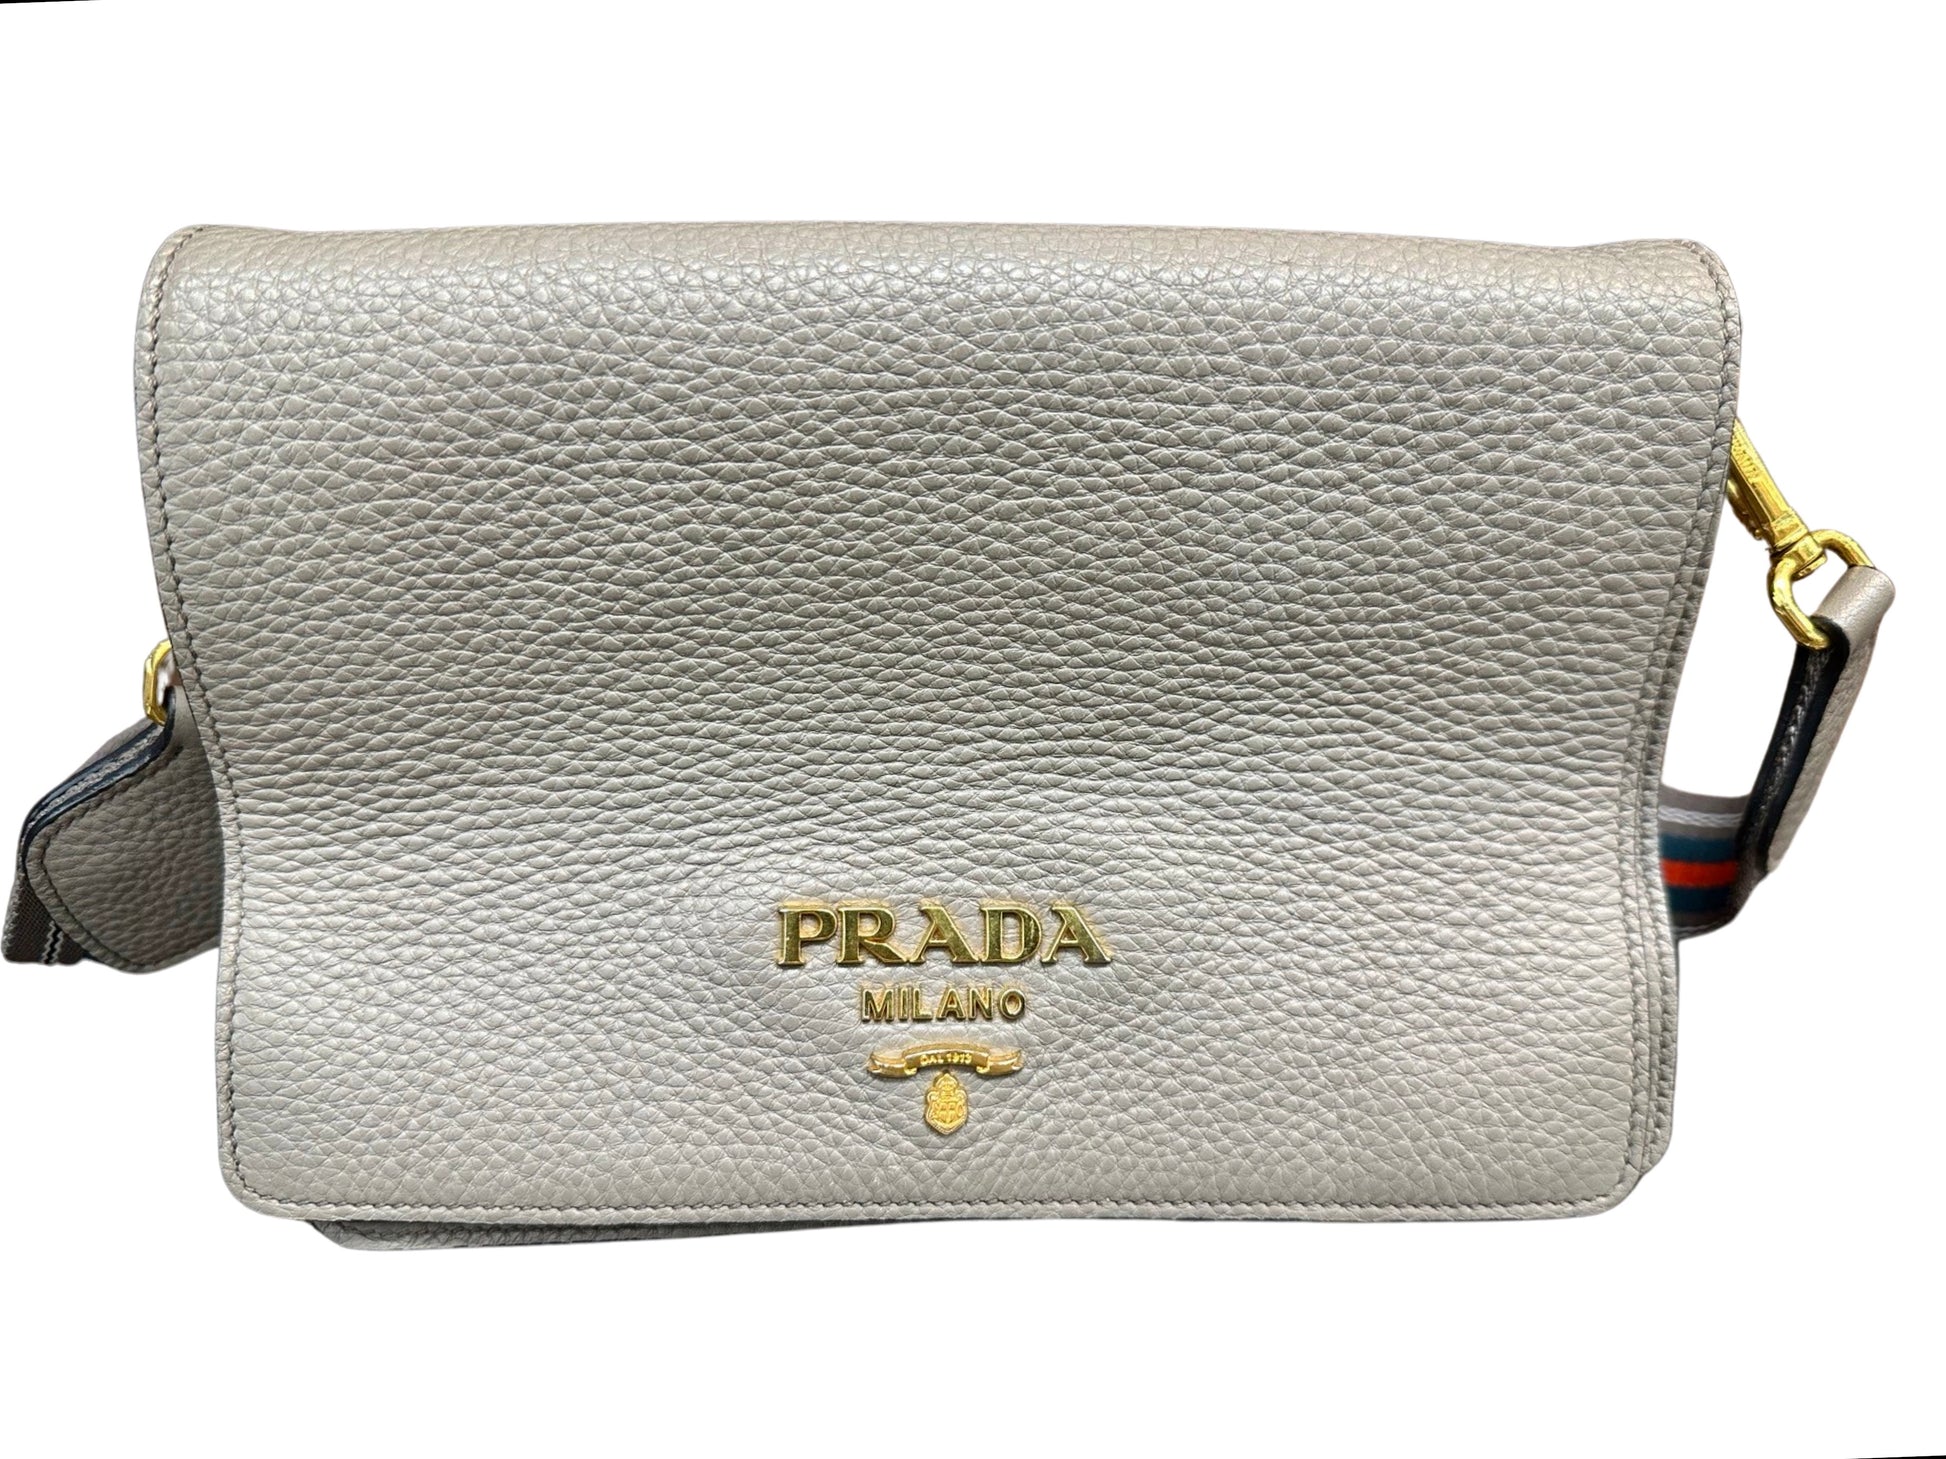 Front of Prada with shoulder strap behind it